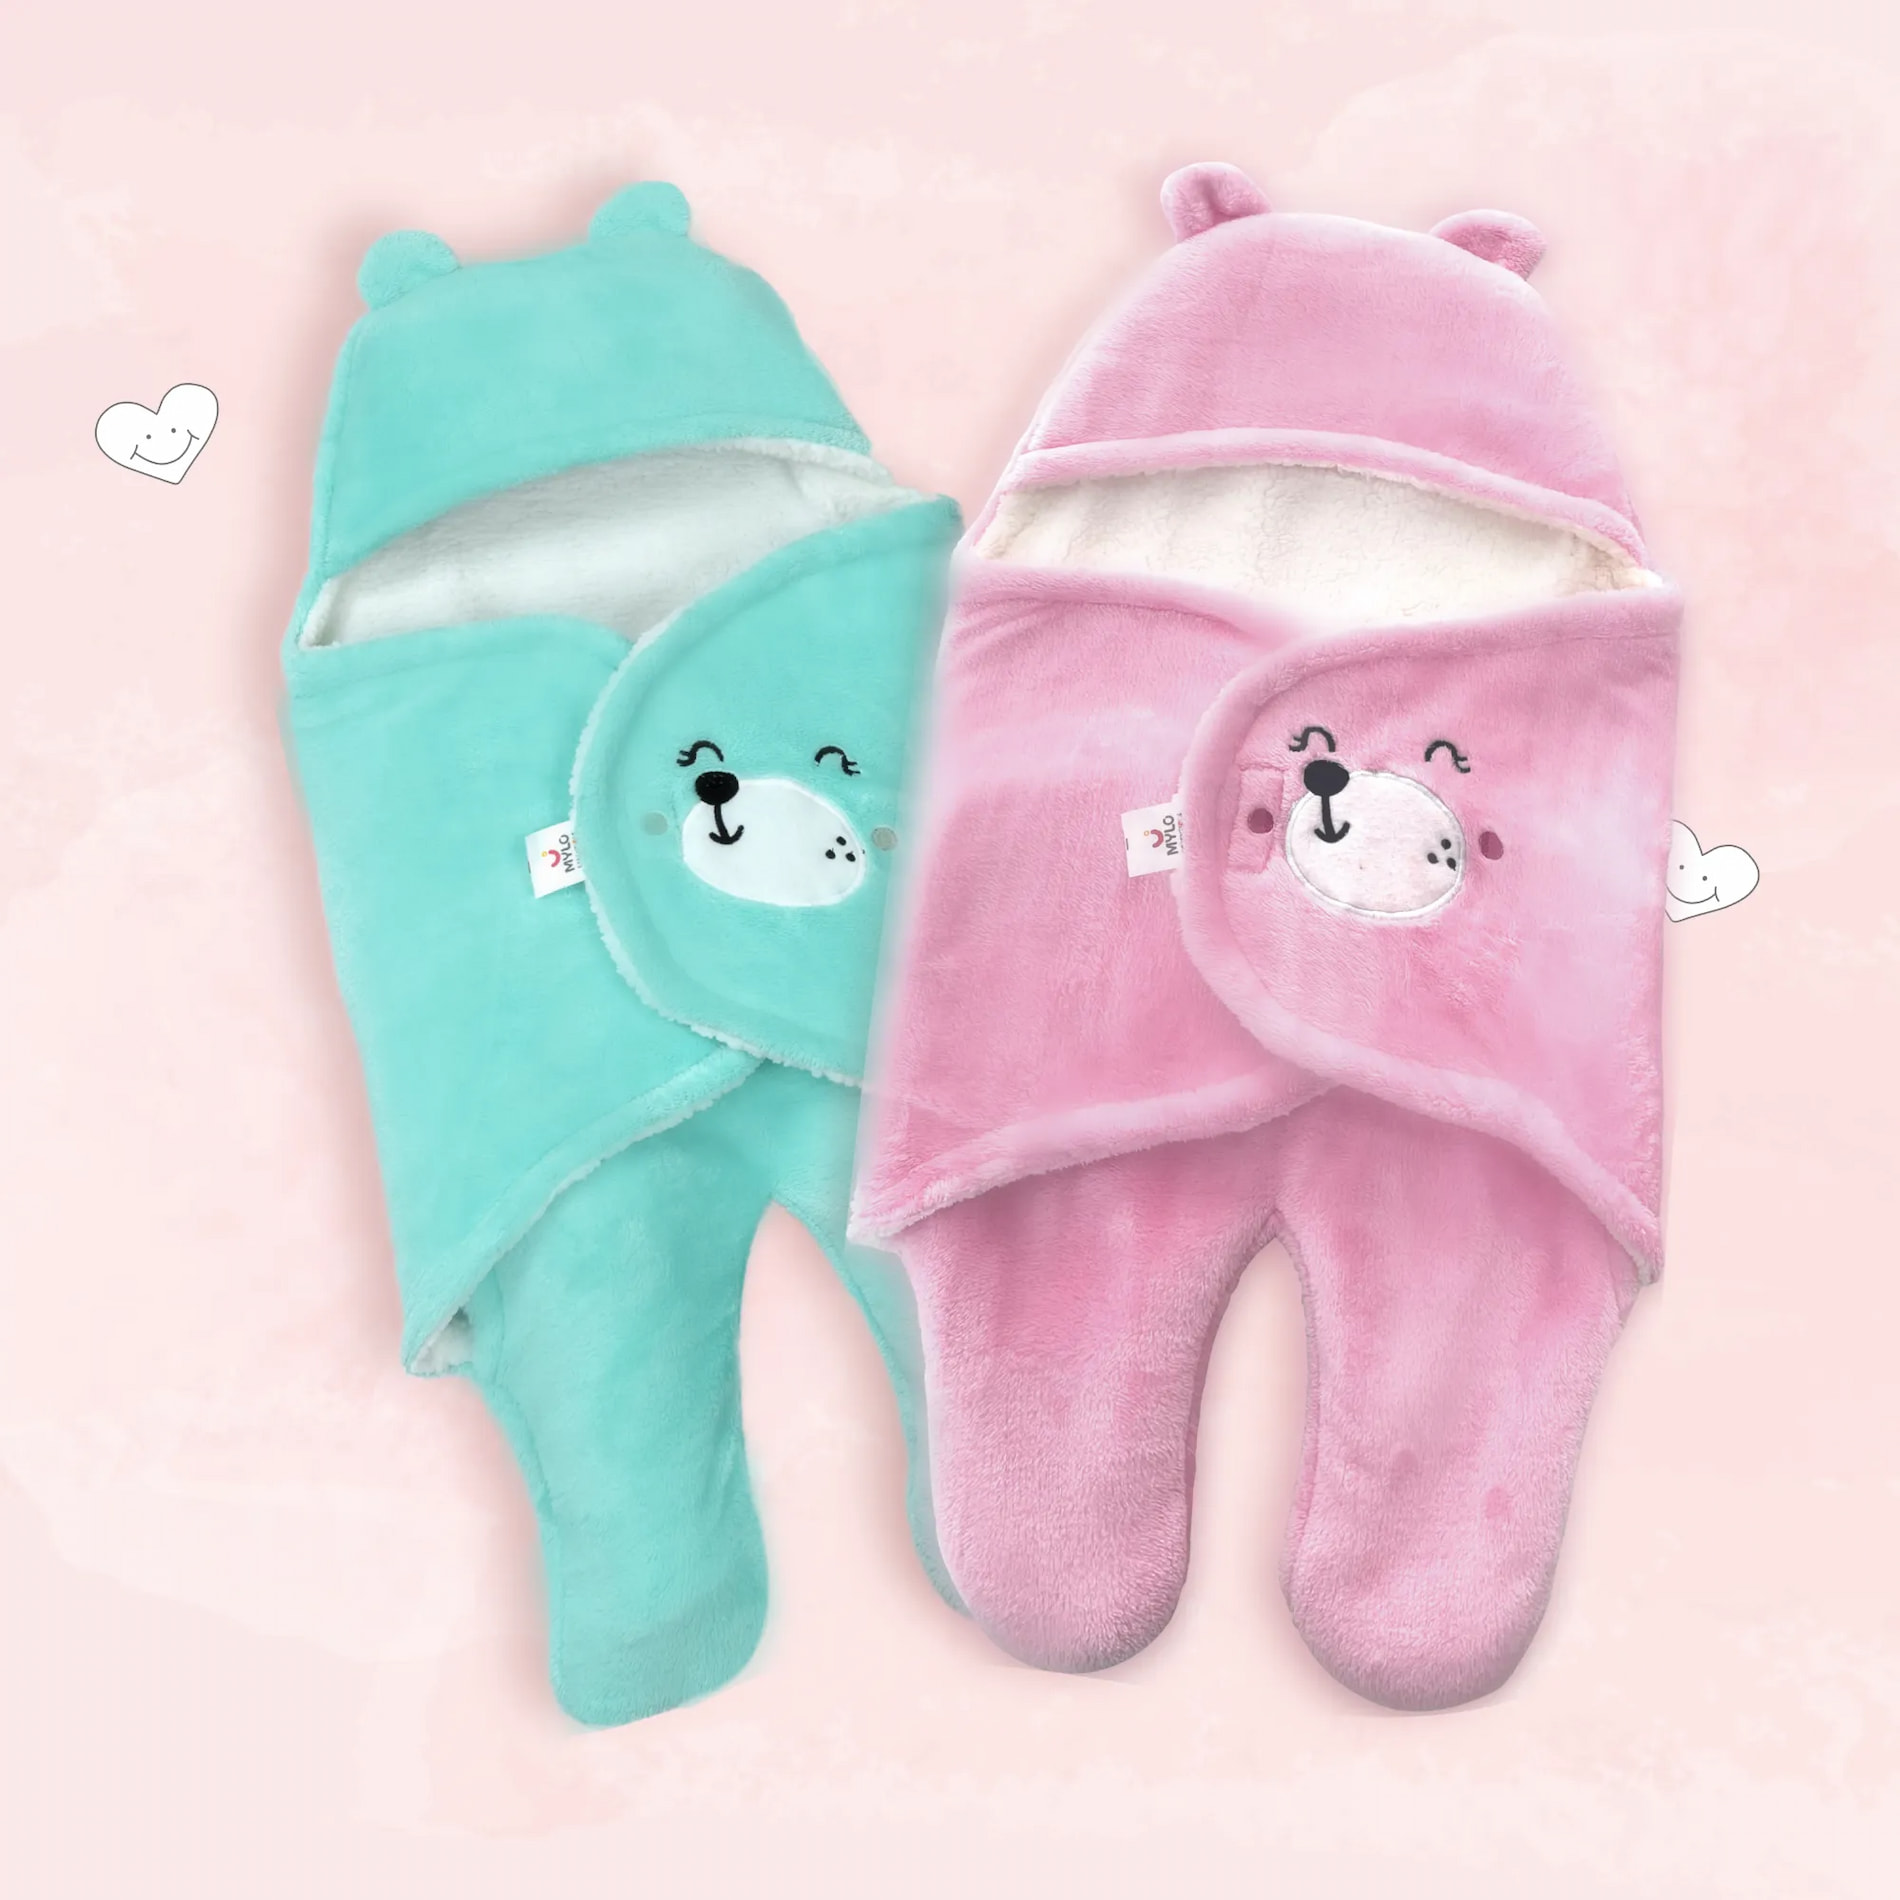 4-in-1 All Season Baby Swaddle-Wrapper For New Born Baby (0-6 months) - Light Pink & Mint Green - pack of 2